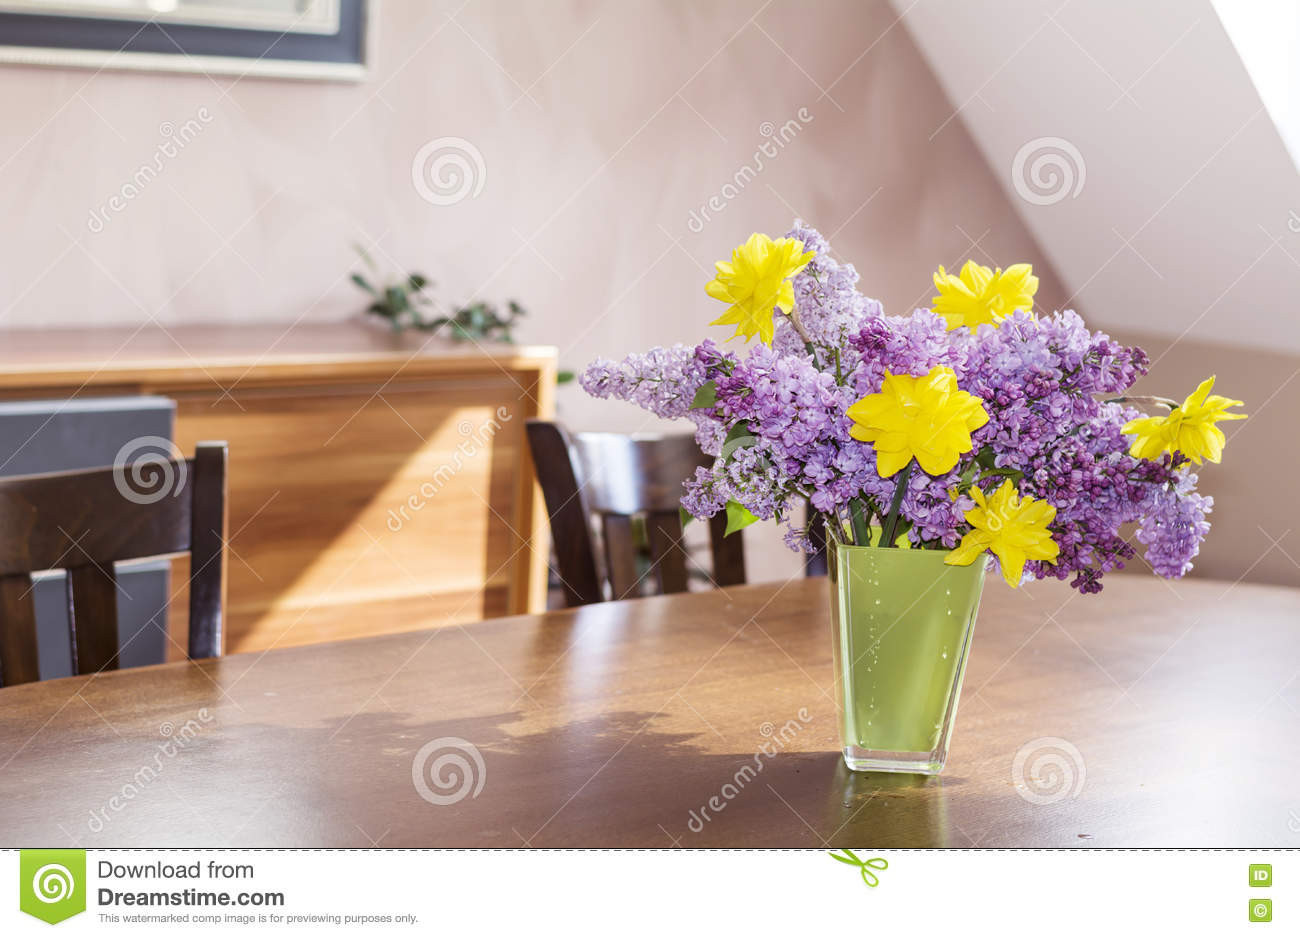 28 Unique Small Green Glass Vase 2024 free download small green glass vase of 10 best of wooden flower vase stand bogekompresorturkiye com inside download yellow narcissus flowers and lilac in a green glass vase a wooden table stock